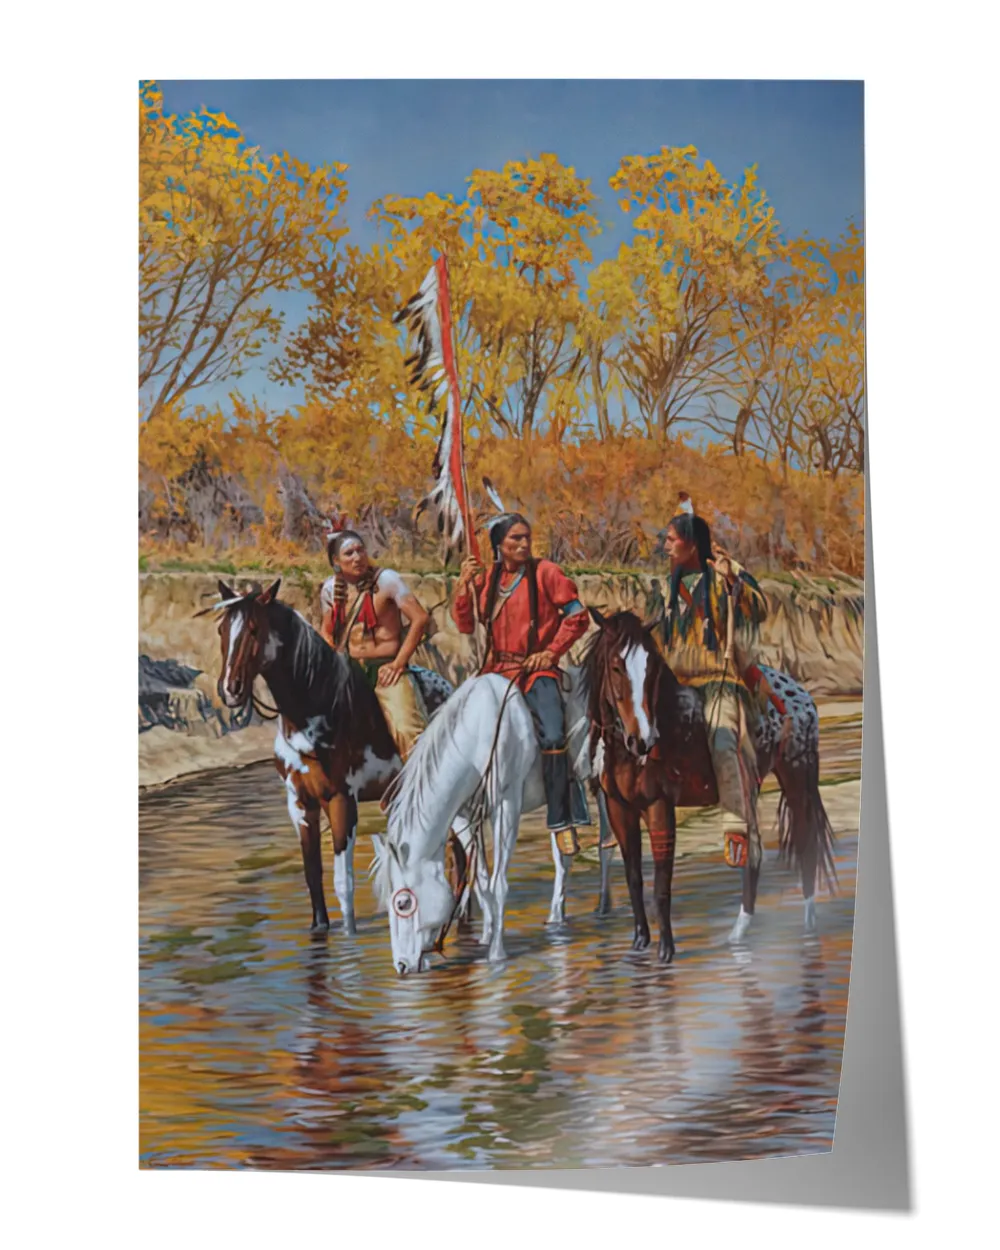 naa-jlv-07 Brazos River Reconnoiter by James Ayers